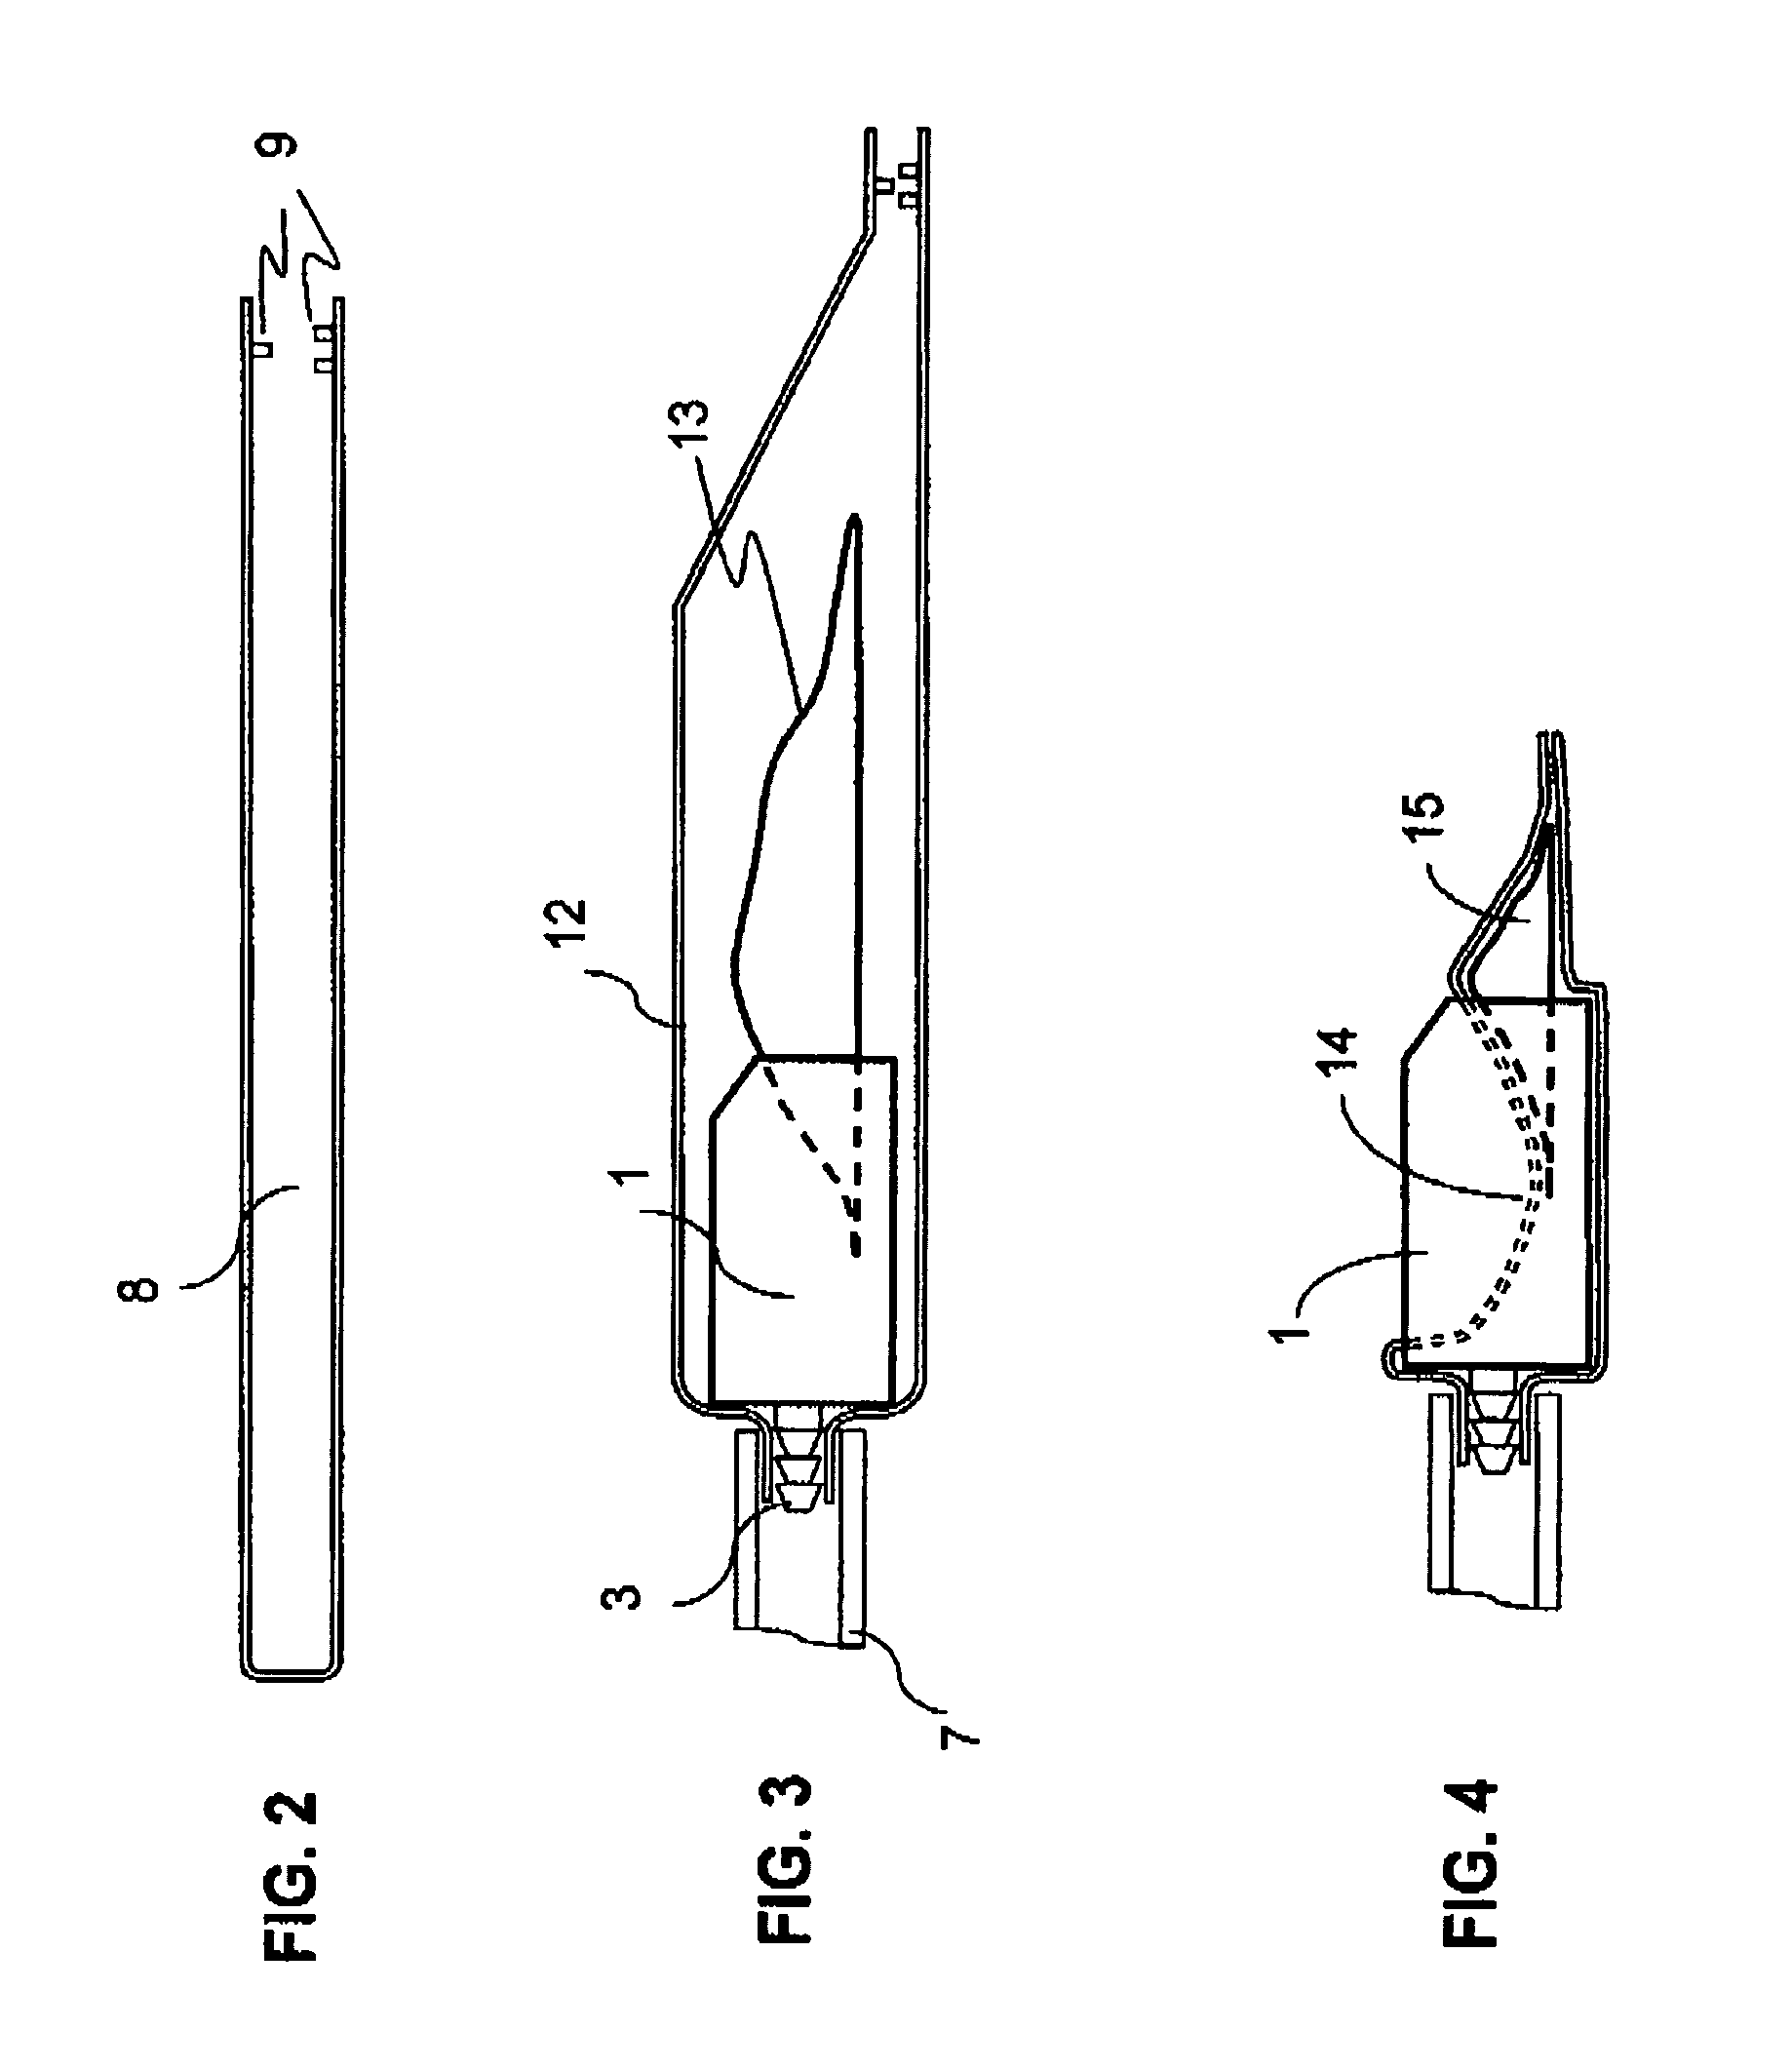 Method and apparatus for evacuating re-sealable bags